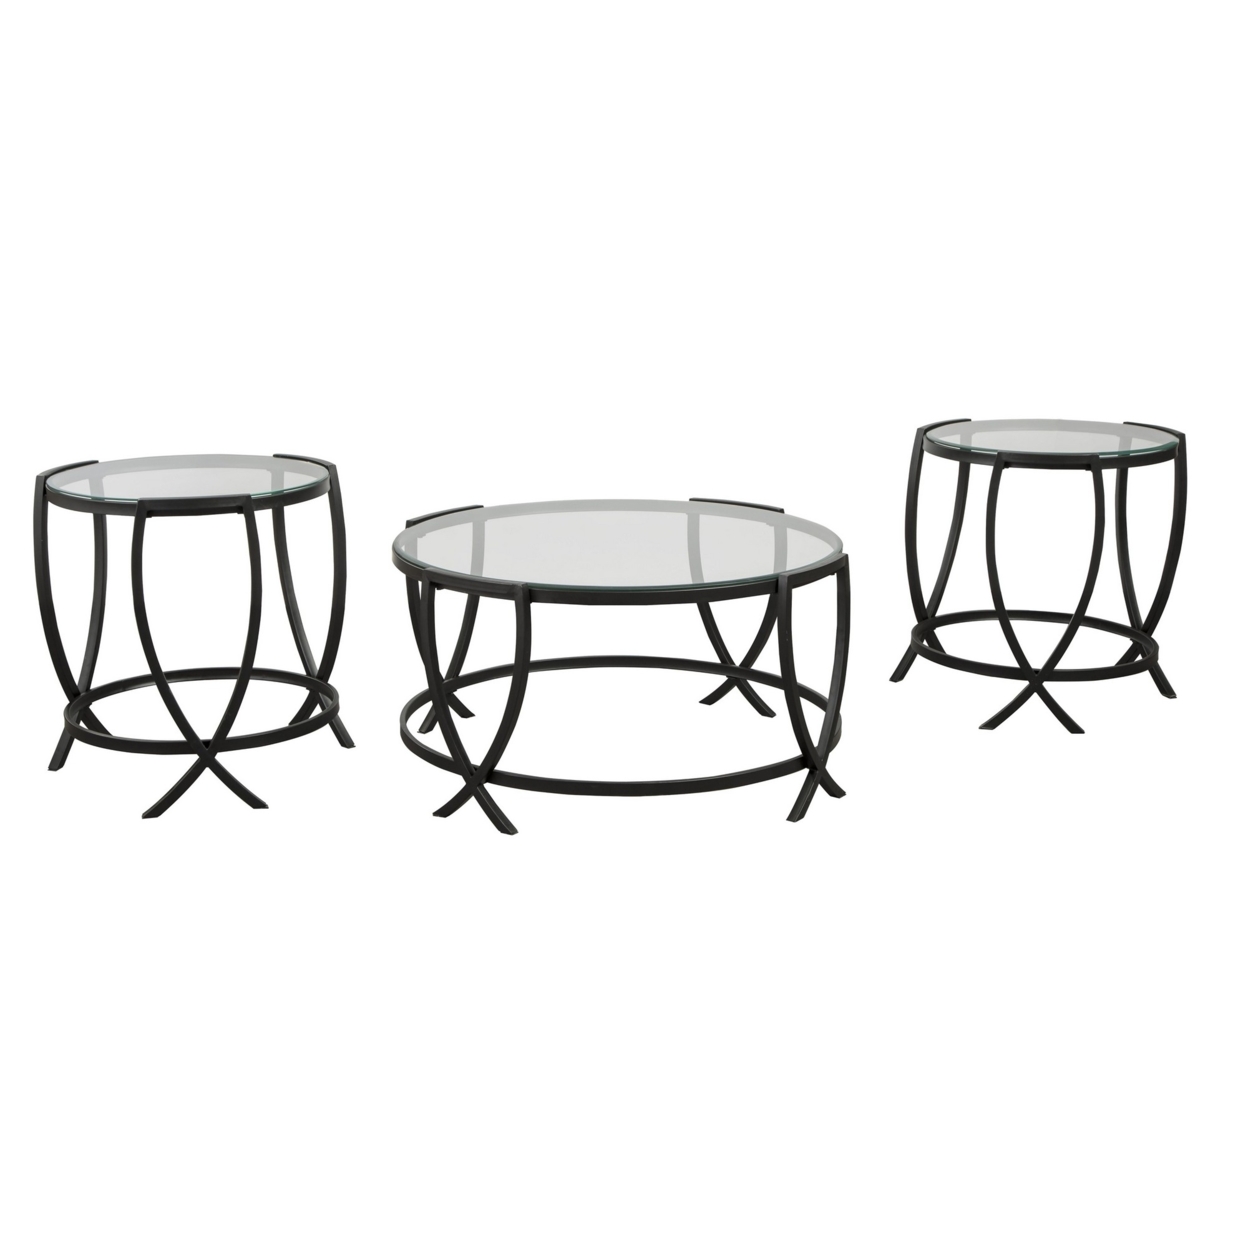 Contemporary Round Table Set With Glass Top And Geometric Metal Body, Black- Saltoro Sherpi